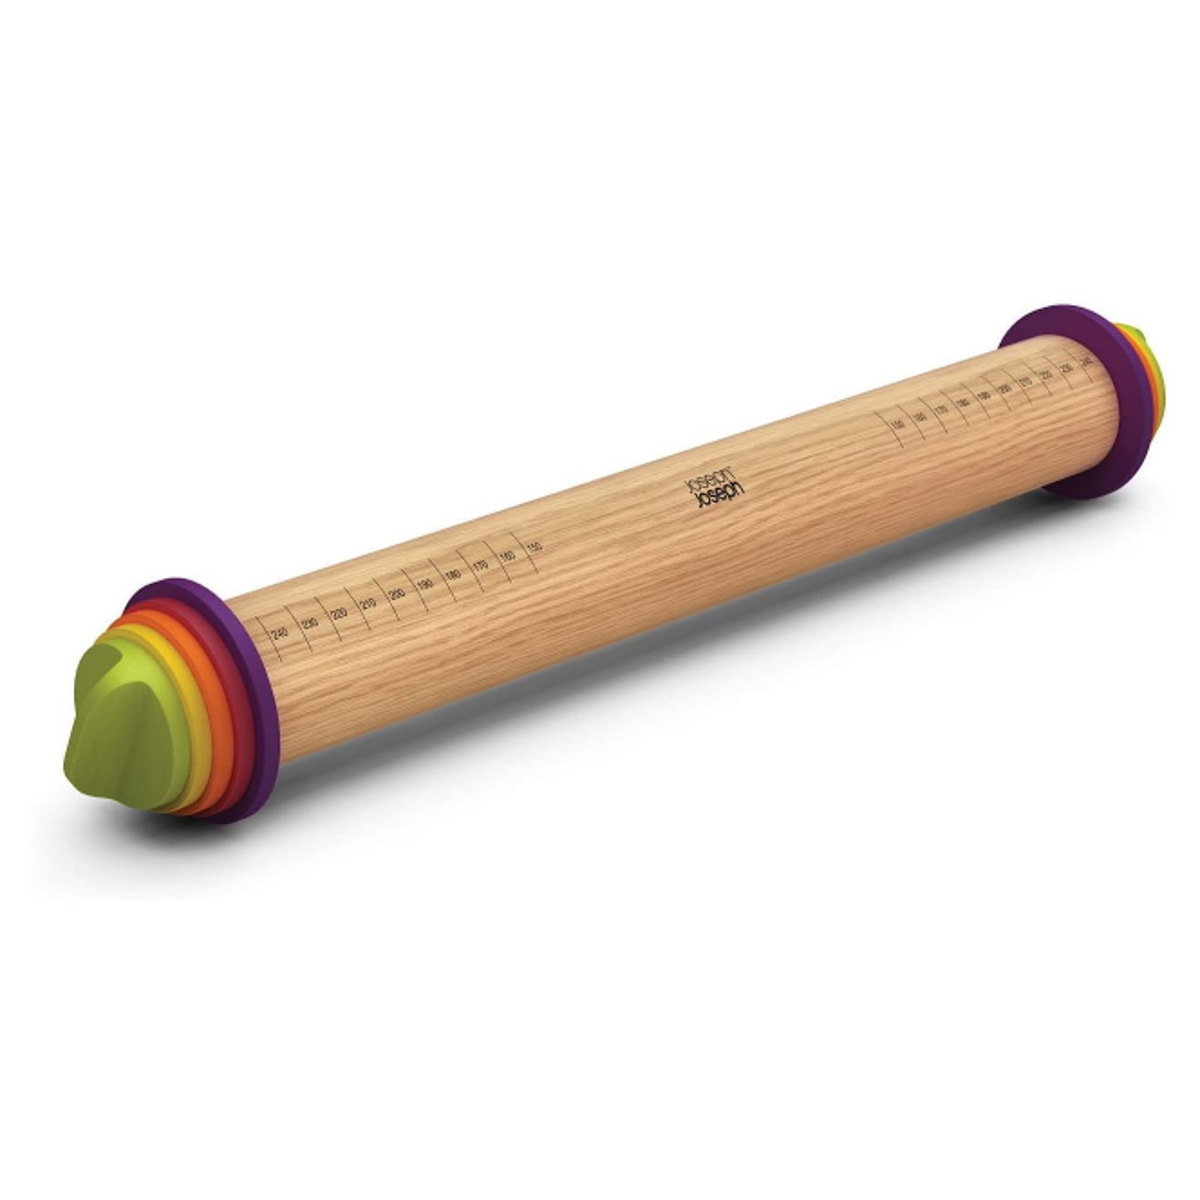 A wooden rolling pin with colorful rings on the ends that can be used to adjust the height of it.